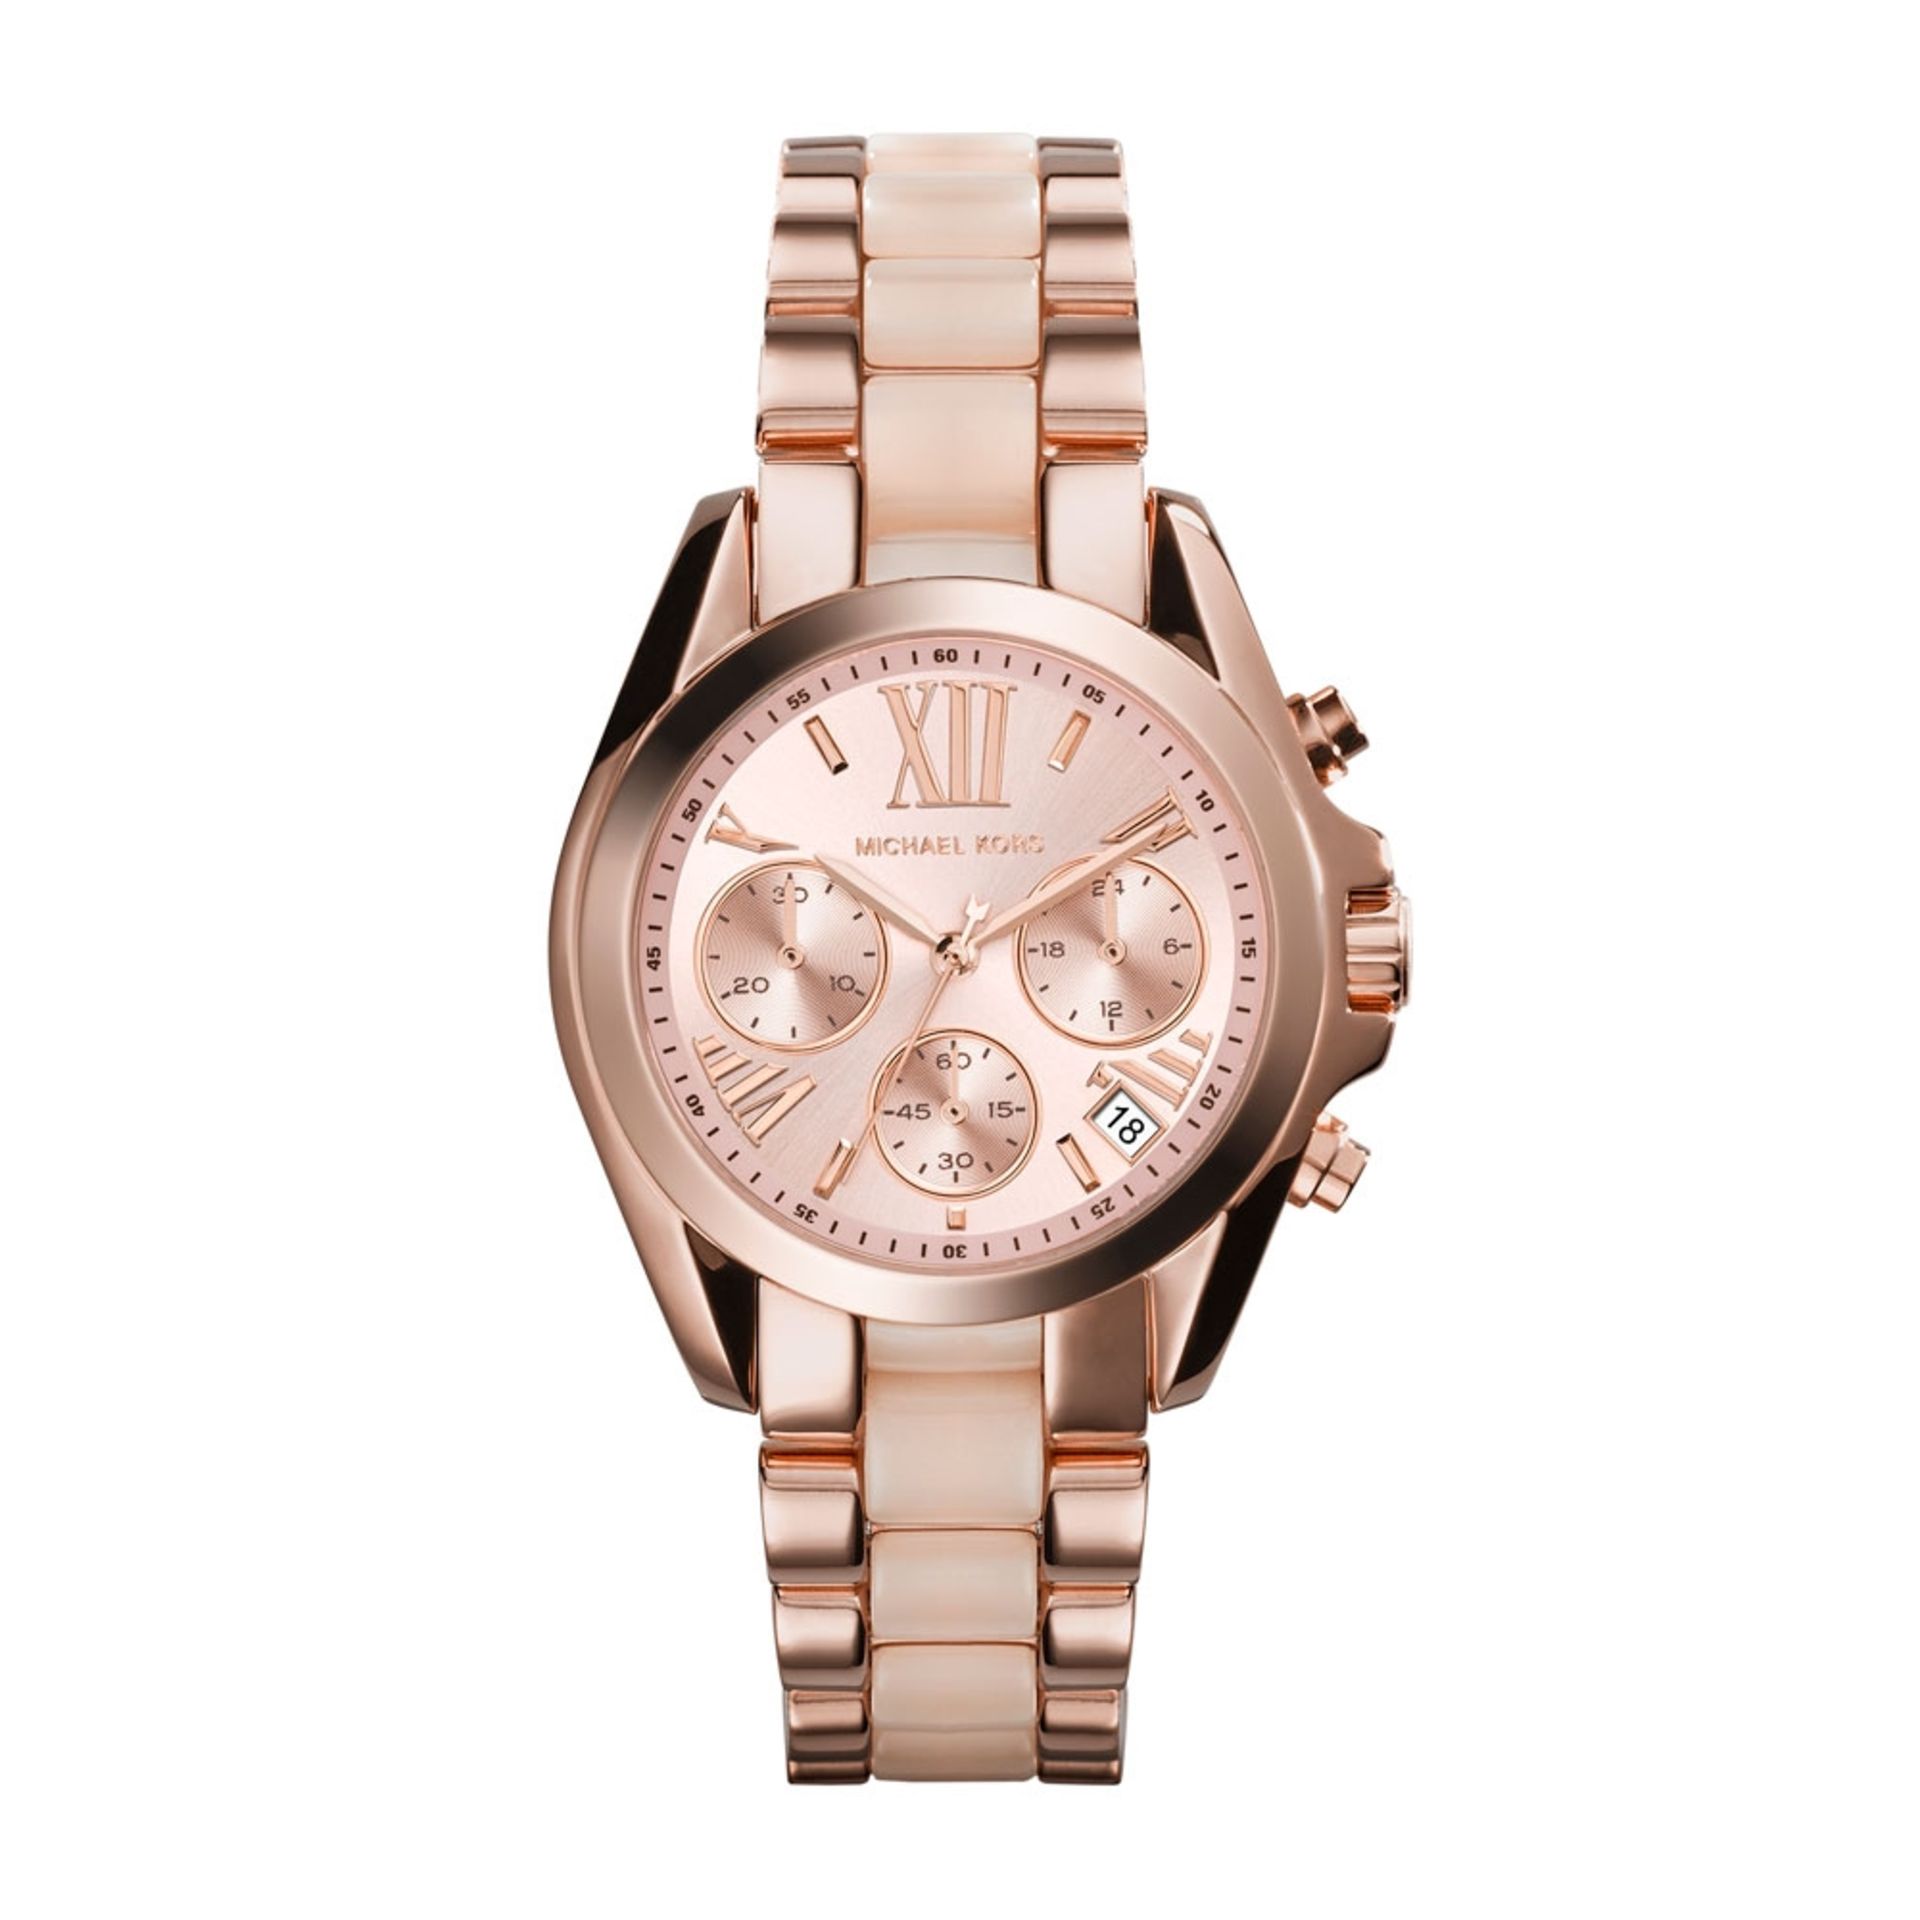 Ladies Michael Kors watch, model number MK6066, stainless steel with rose gold plating. Round face